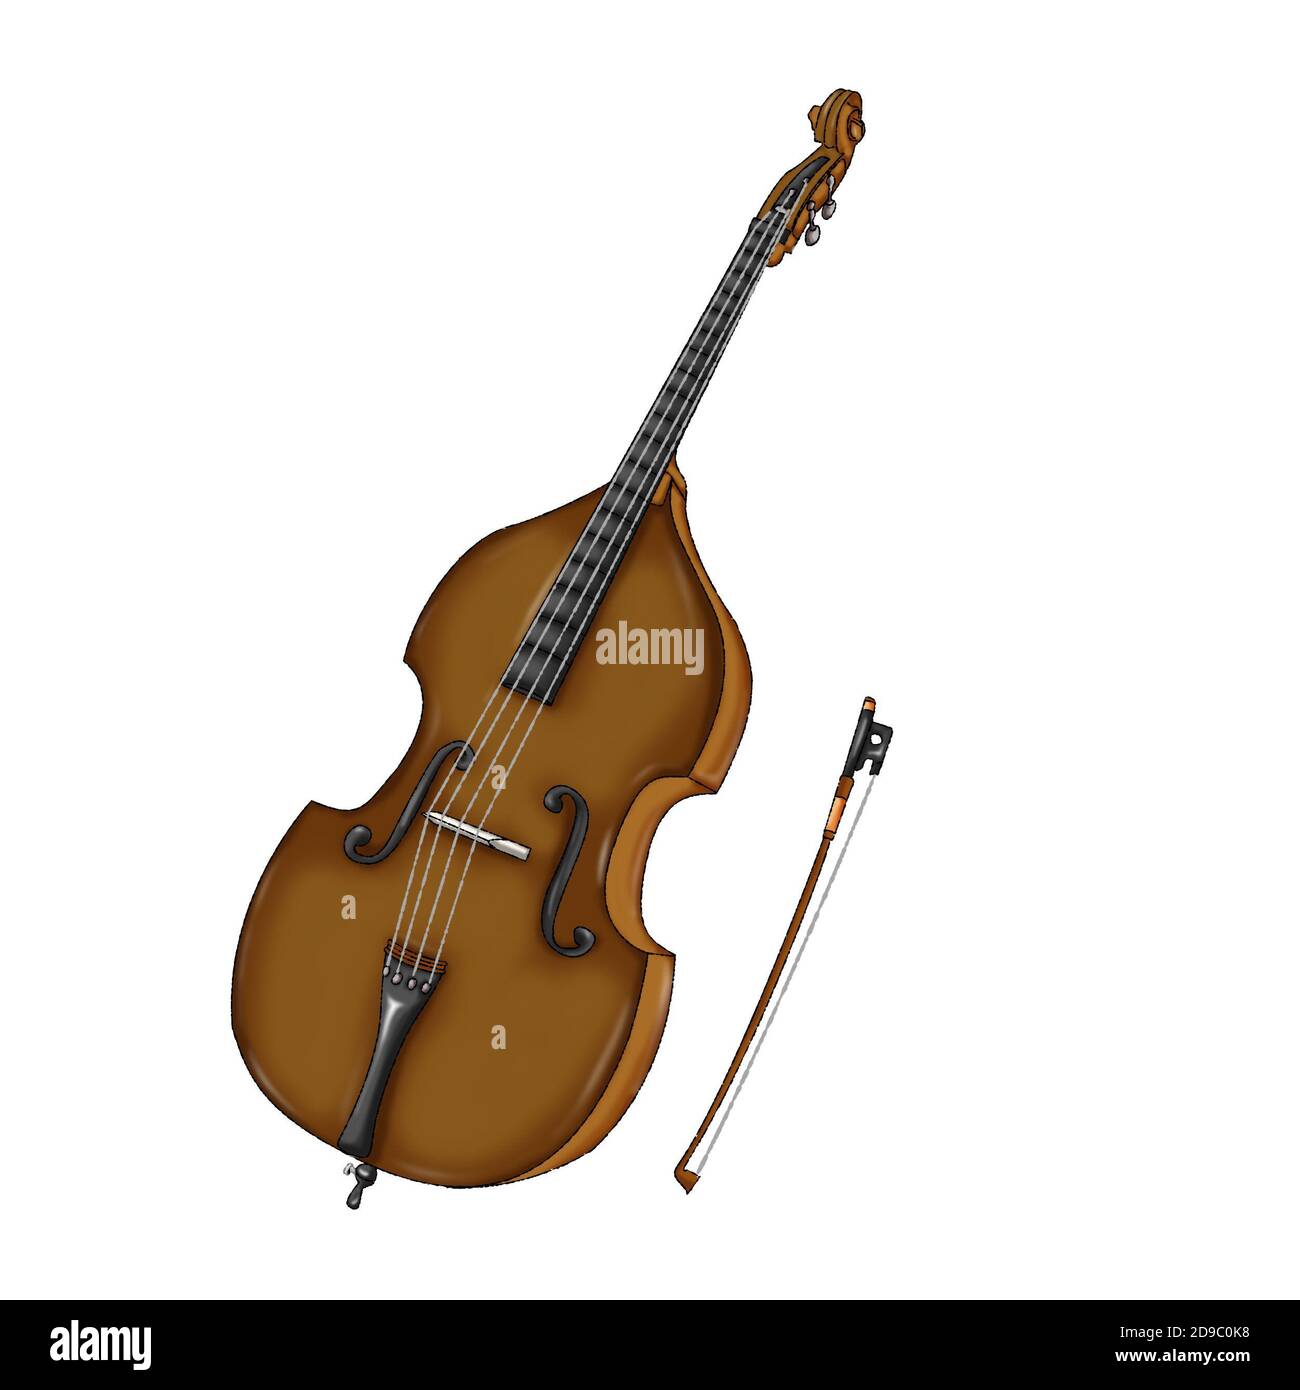 Contrabass is a musical instrument. Illustration on white background.. Stock Photo